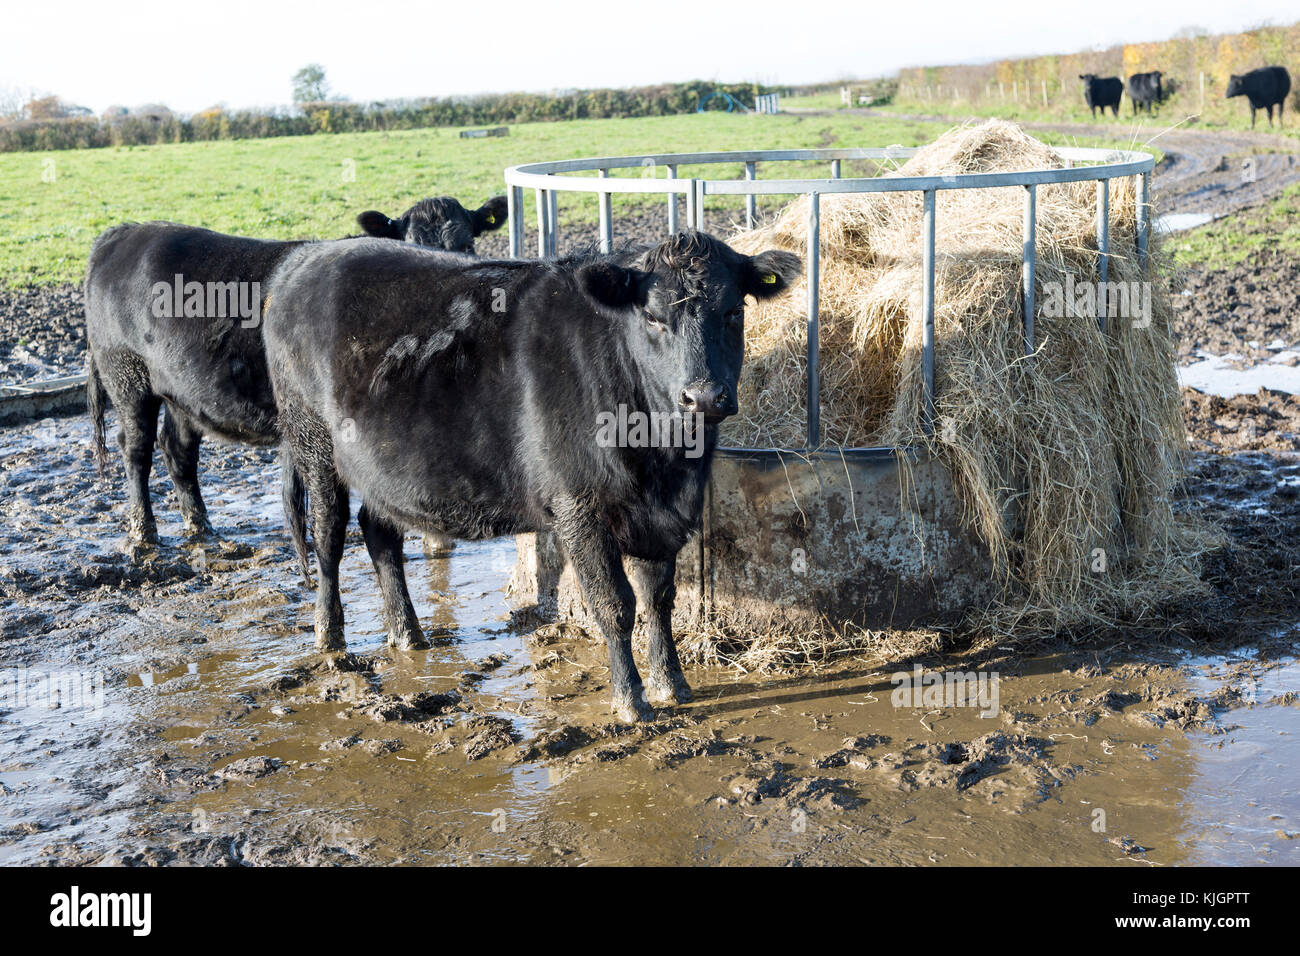 Aberdeen Angus cross breed beef cattle calves standing muddy field by feed container, Wilcot, Wiltshire, England, UK Stock Photo